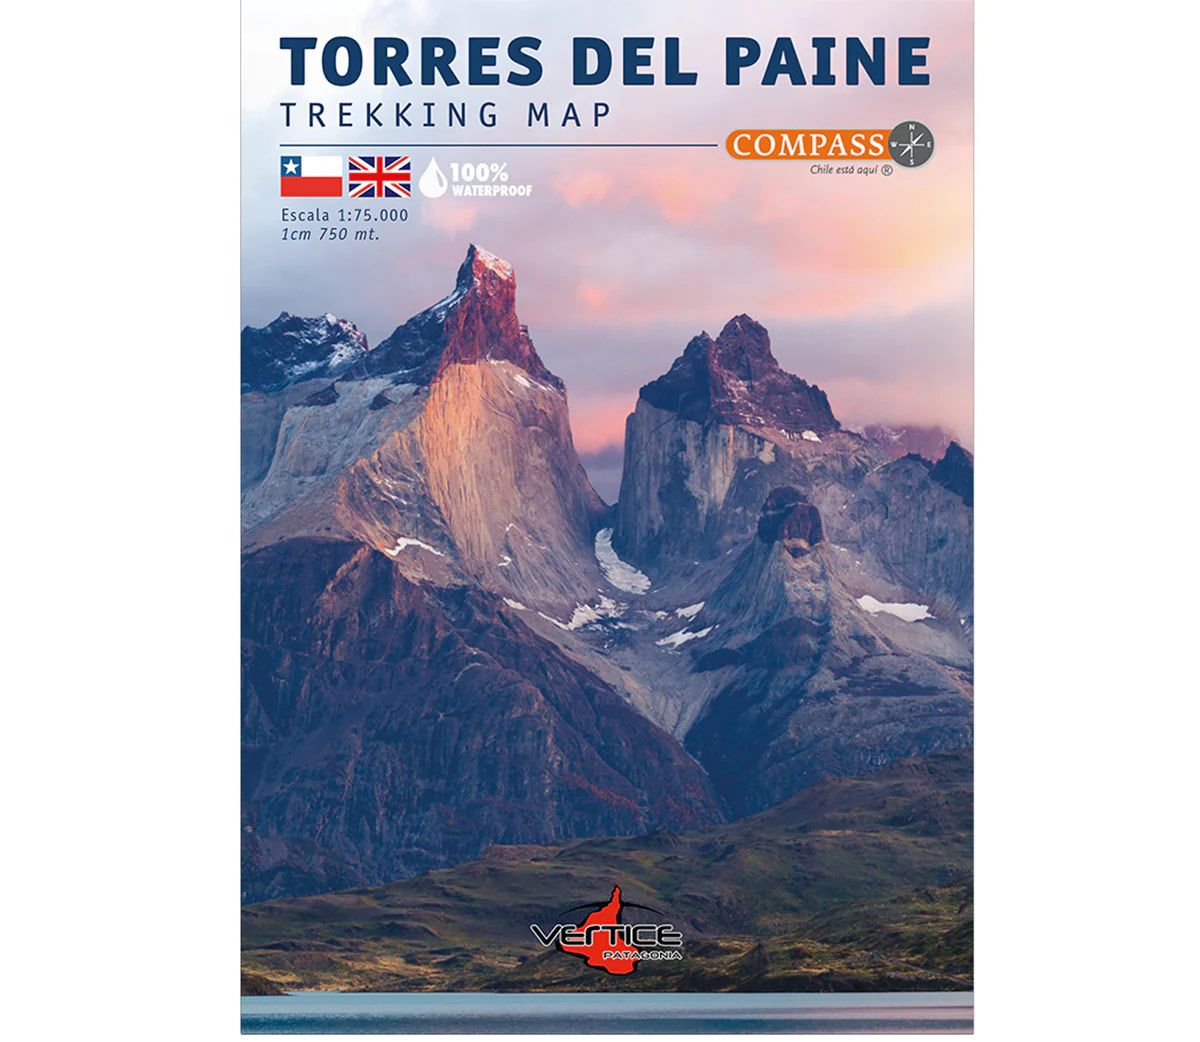 Torres del Paine Trekking Map 1:75.000 - Compass Chile